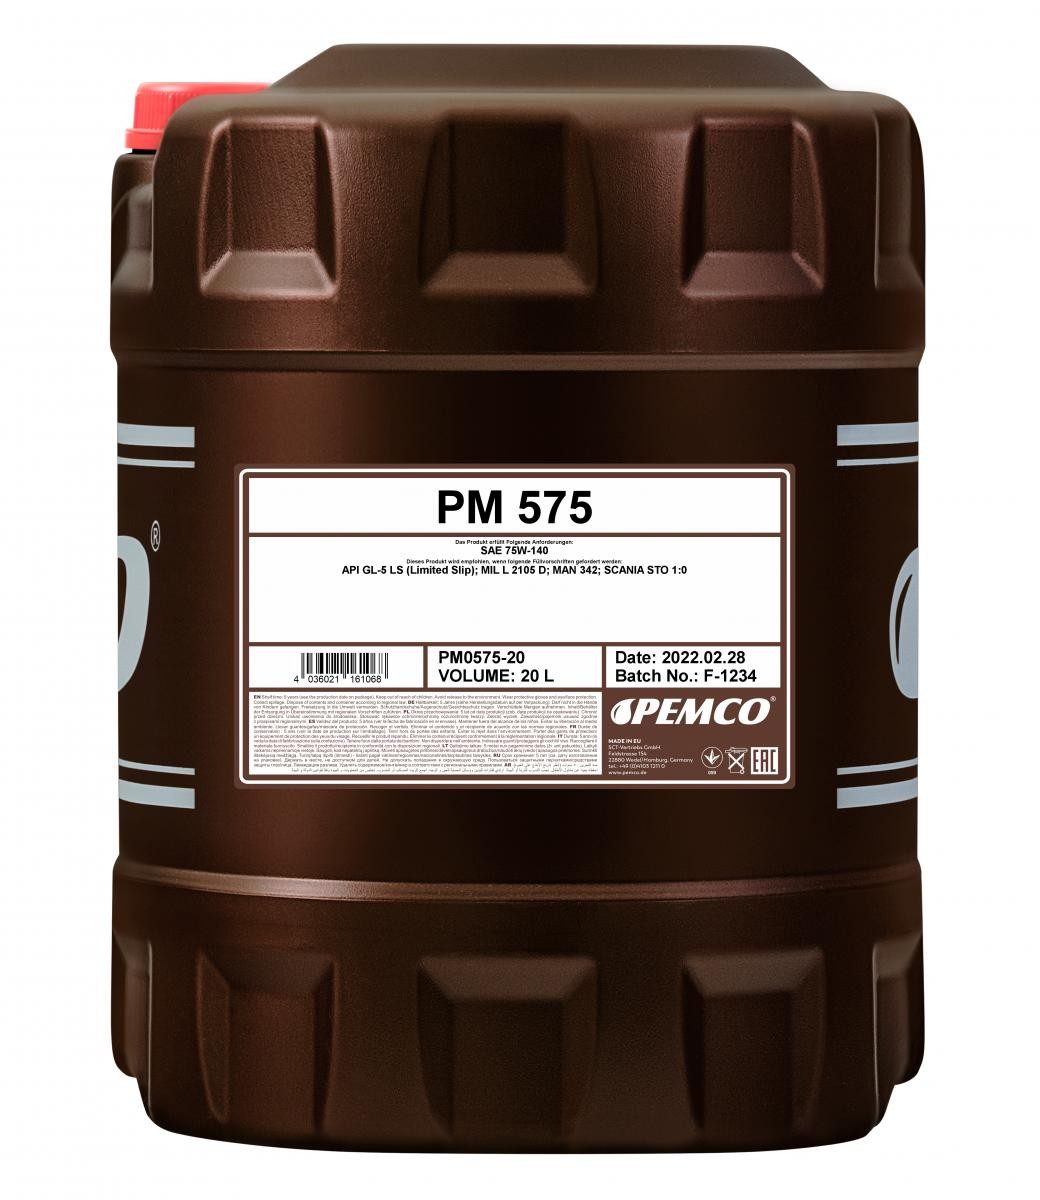 PEMCO iPOID 575 PM0575-20 Manual Transmission Oil Capacity: 20l, 75W-140